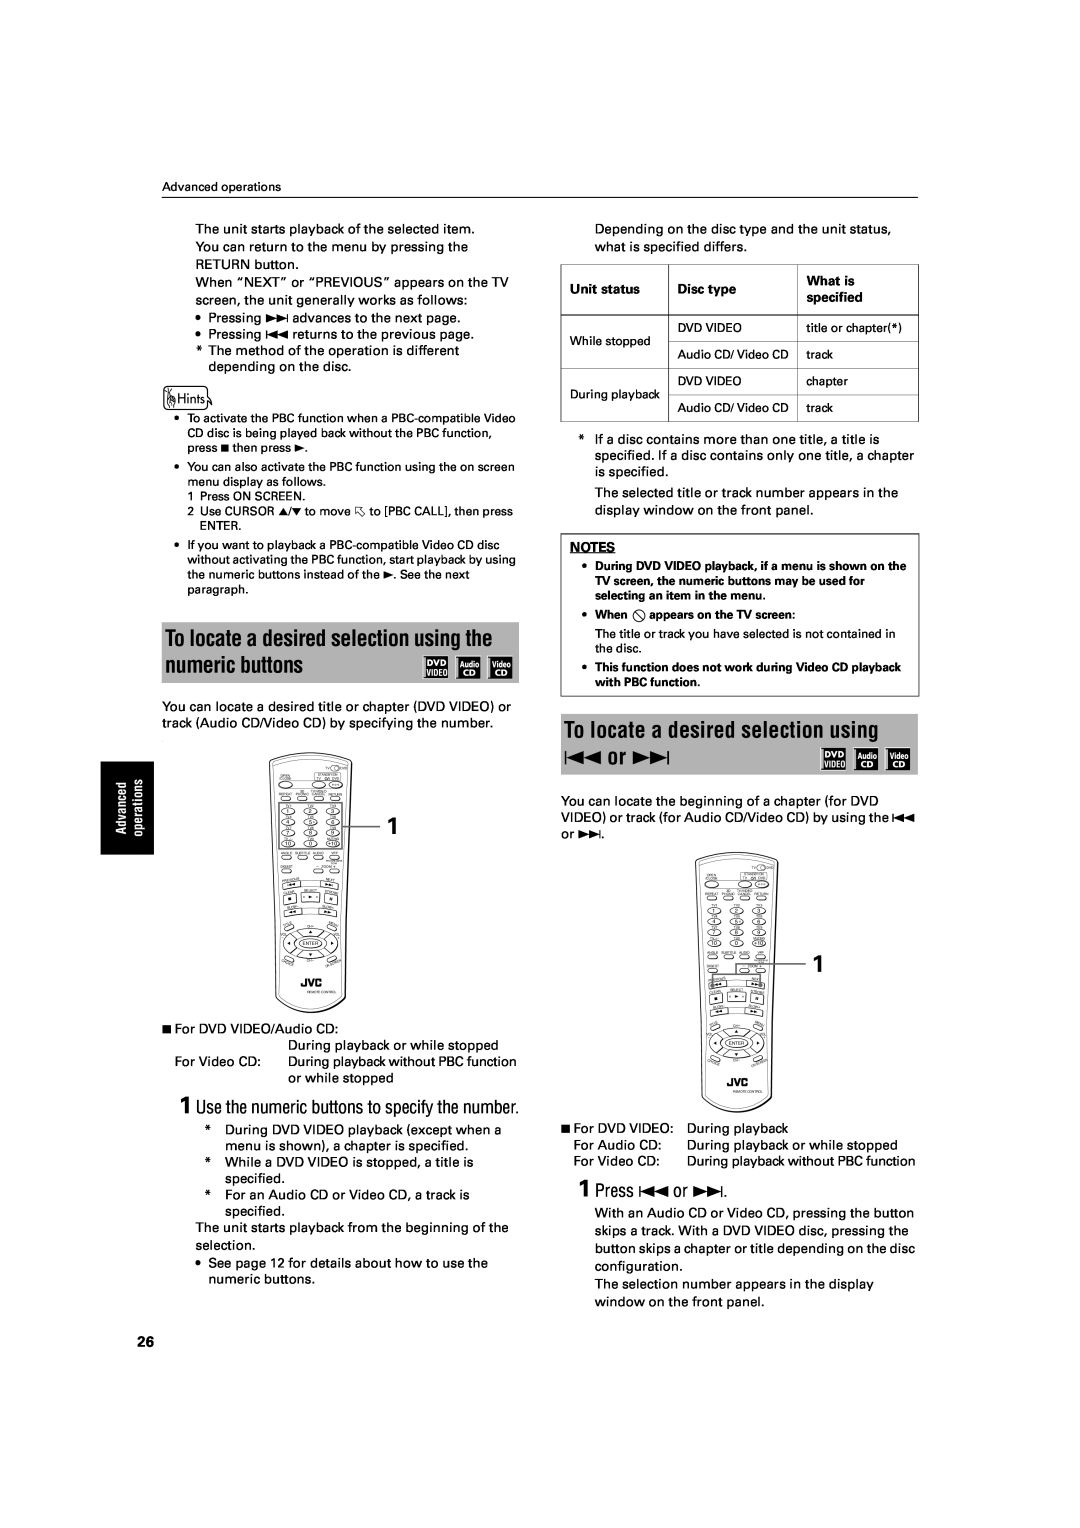 JVC XV-S60 manual To locate a desired selection using the numeric buttons, Use the numeric buttons to specify the number 